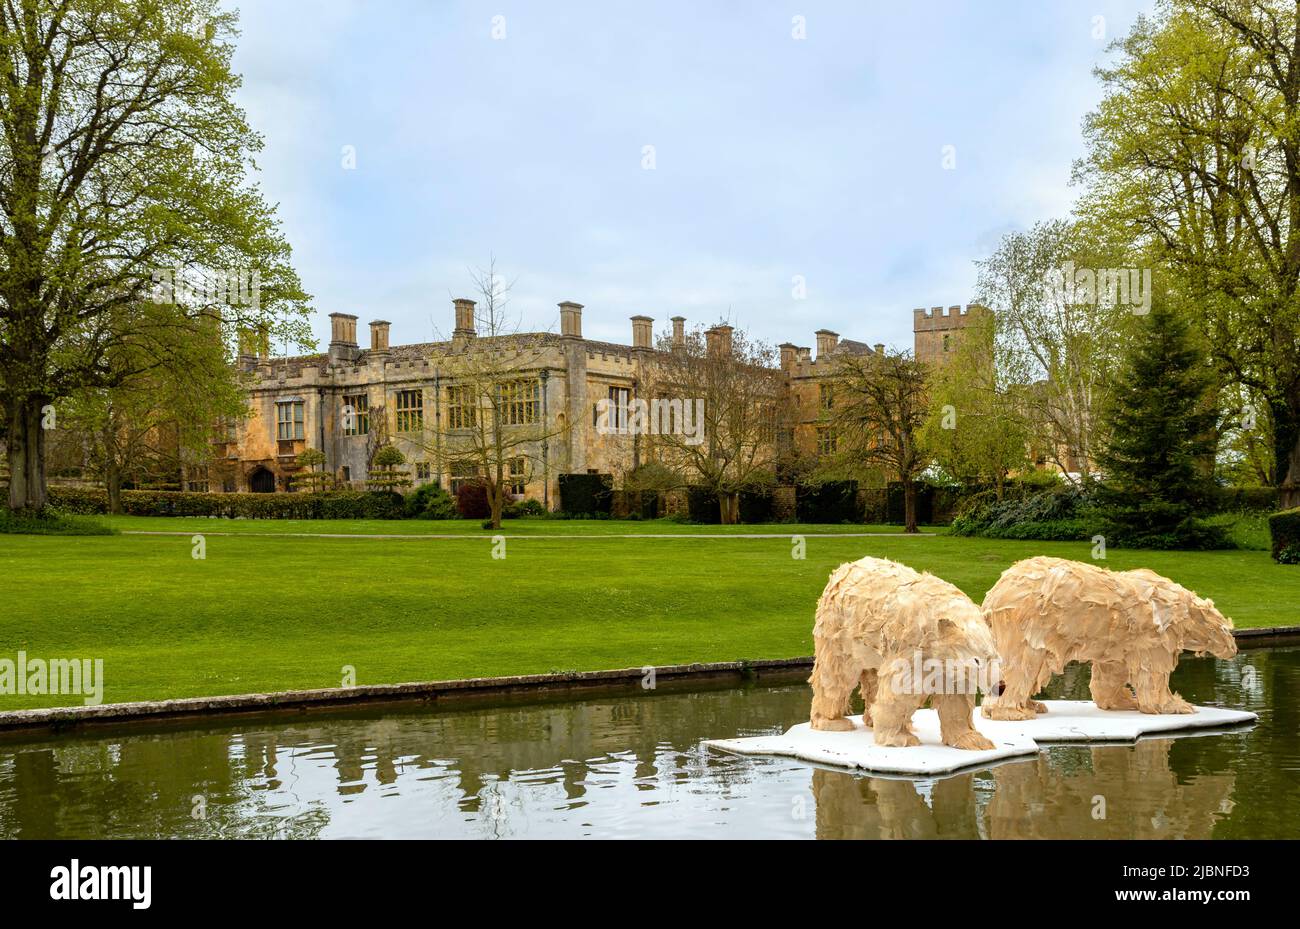 Exhibited artwork of Polar bears on ice floes in the gardens of Sudeley, Castle, Sudeley, Gloucestershire, Cotswolds, England, Great Britain, UK. Stock Photo